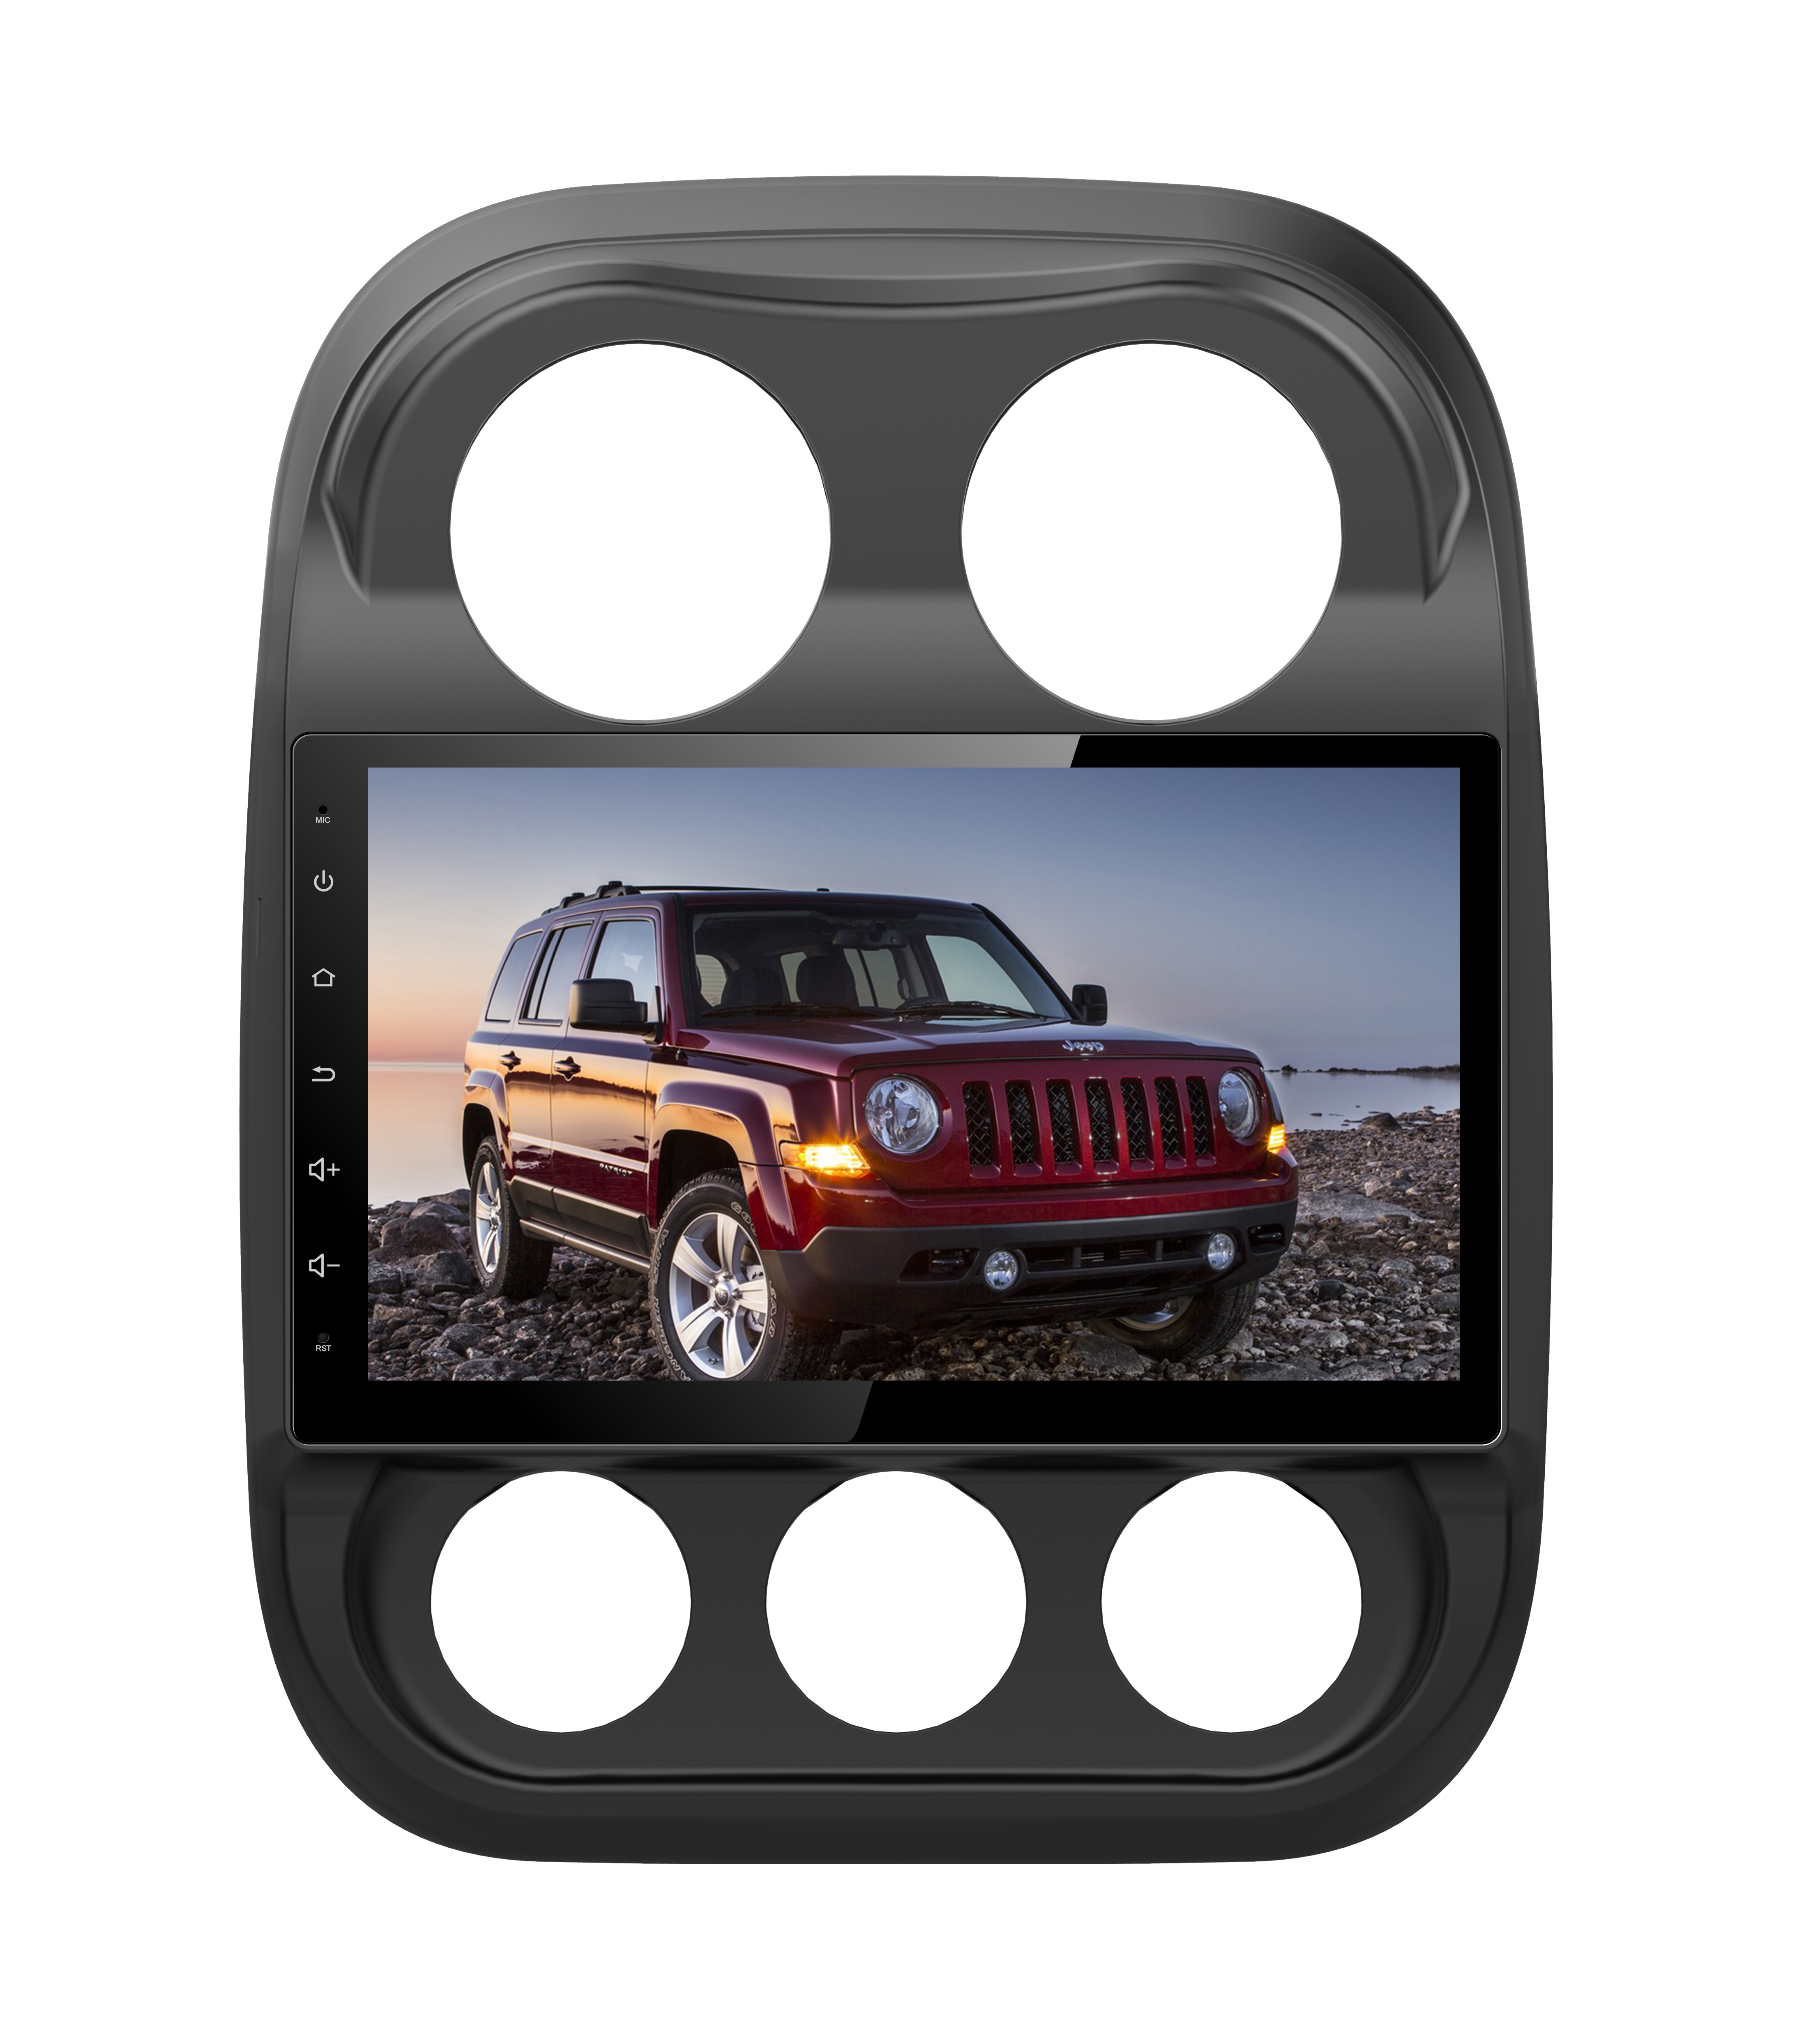 JEEP COMPASS Patriot 2007 10.1'' Touch Screen Car Pad Android 7.1/6.0 FM AM Radio Quad/Eight Cores Auto GPS Navigation Bluetooth Wifi Mirror link Rearview